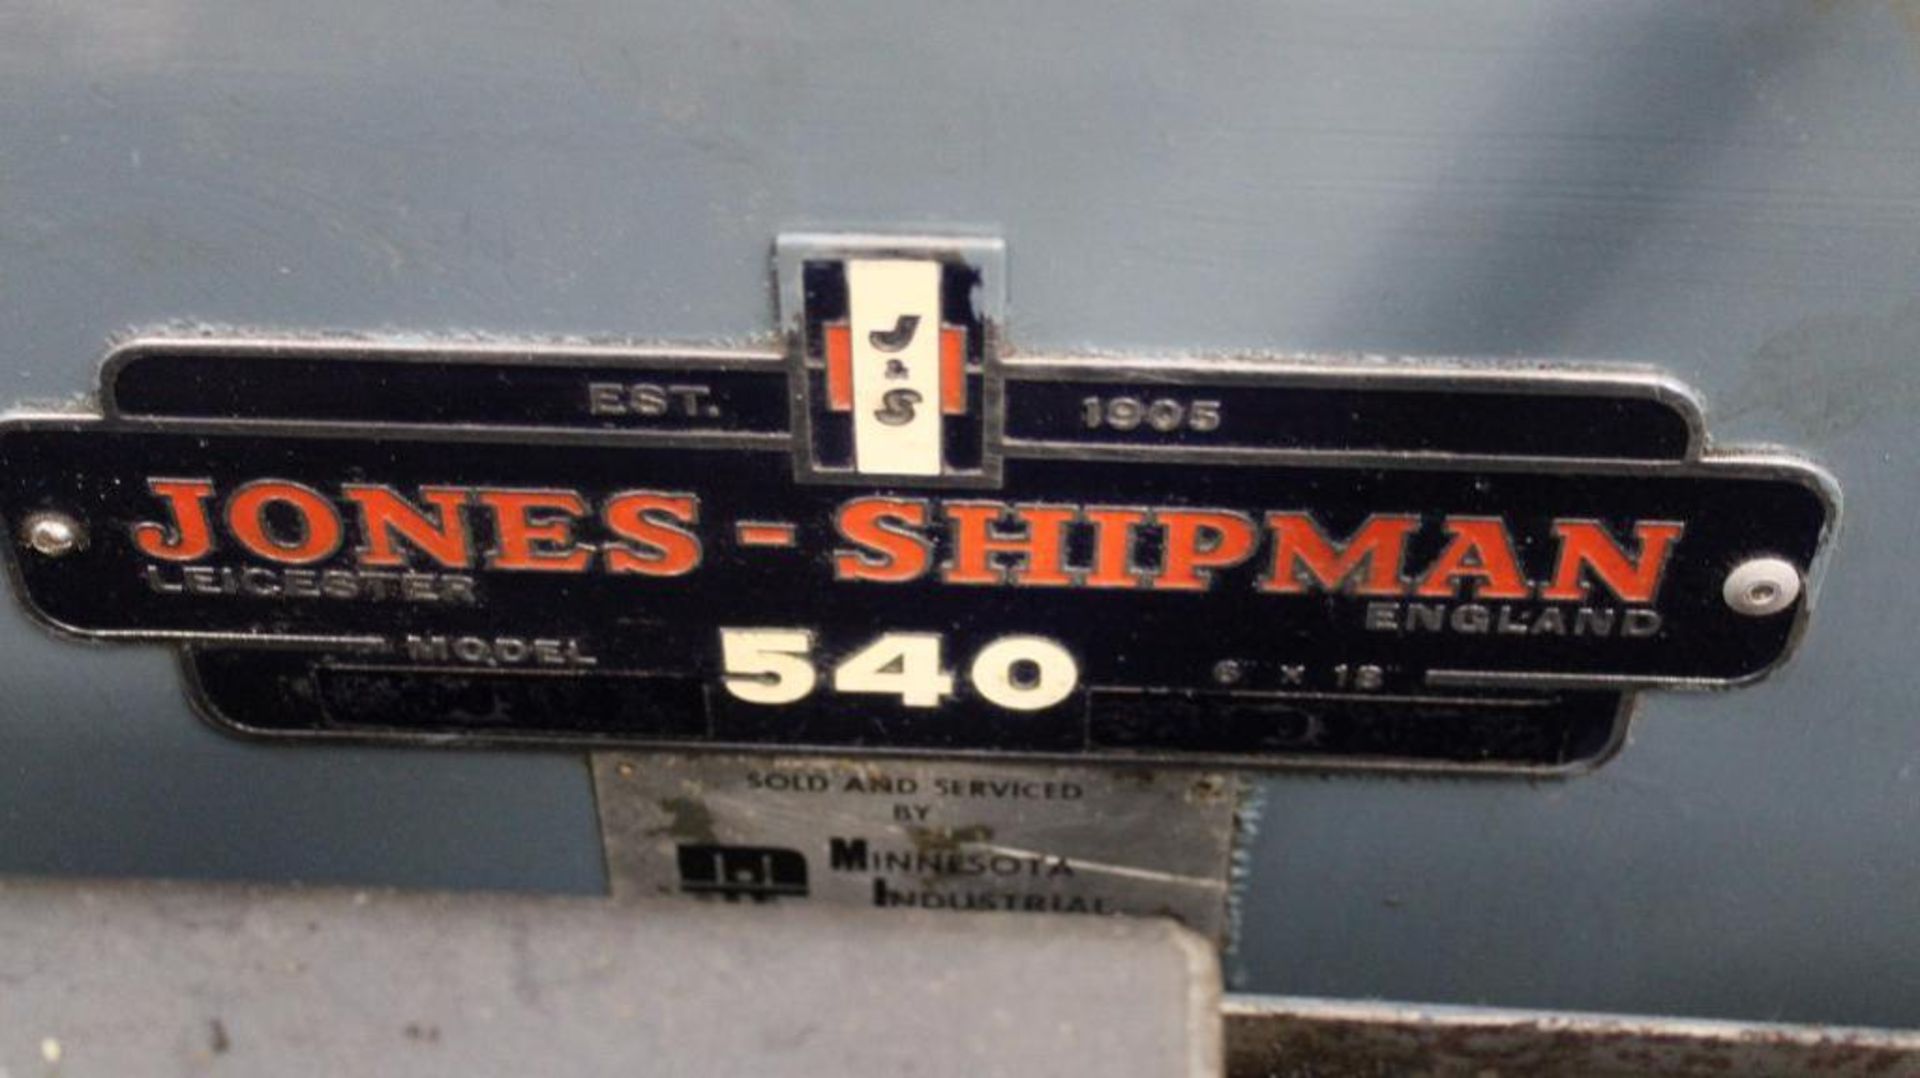 JONES & SHIPMAN ?MODEL 540, 3-AXIS FEED, AUTOMATIC SURFACE GRINDER - Image 12 of 14